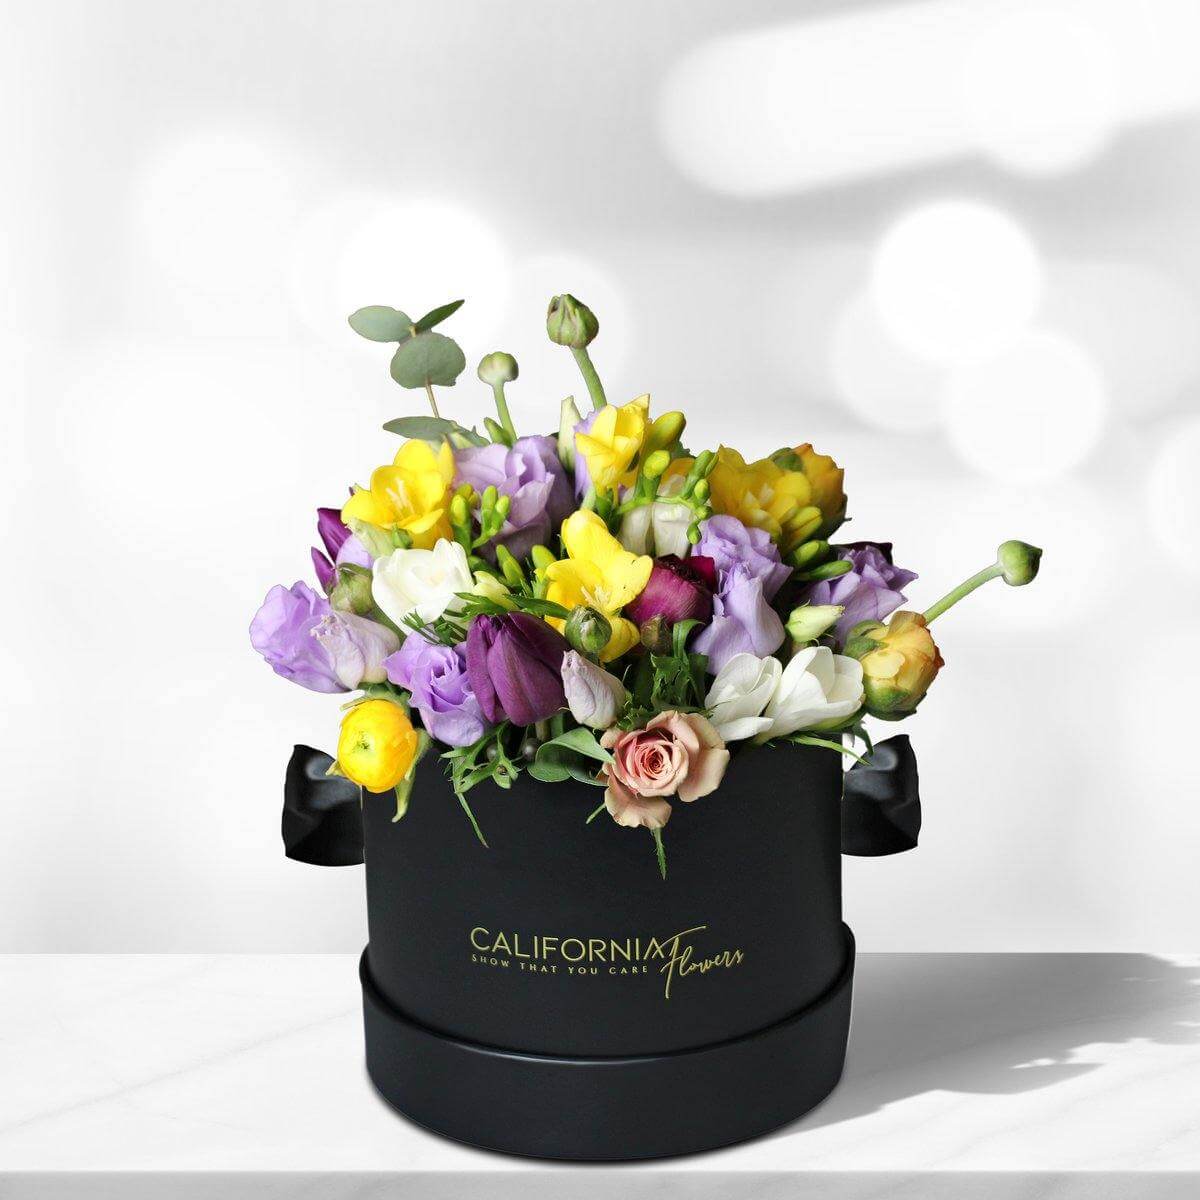 Box with freesias, lisianthus and ranunculus